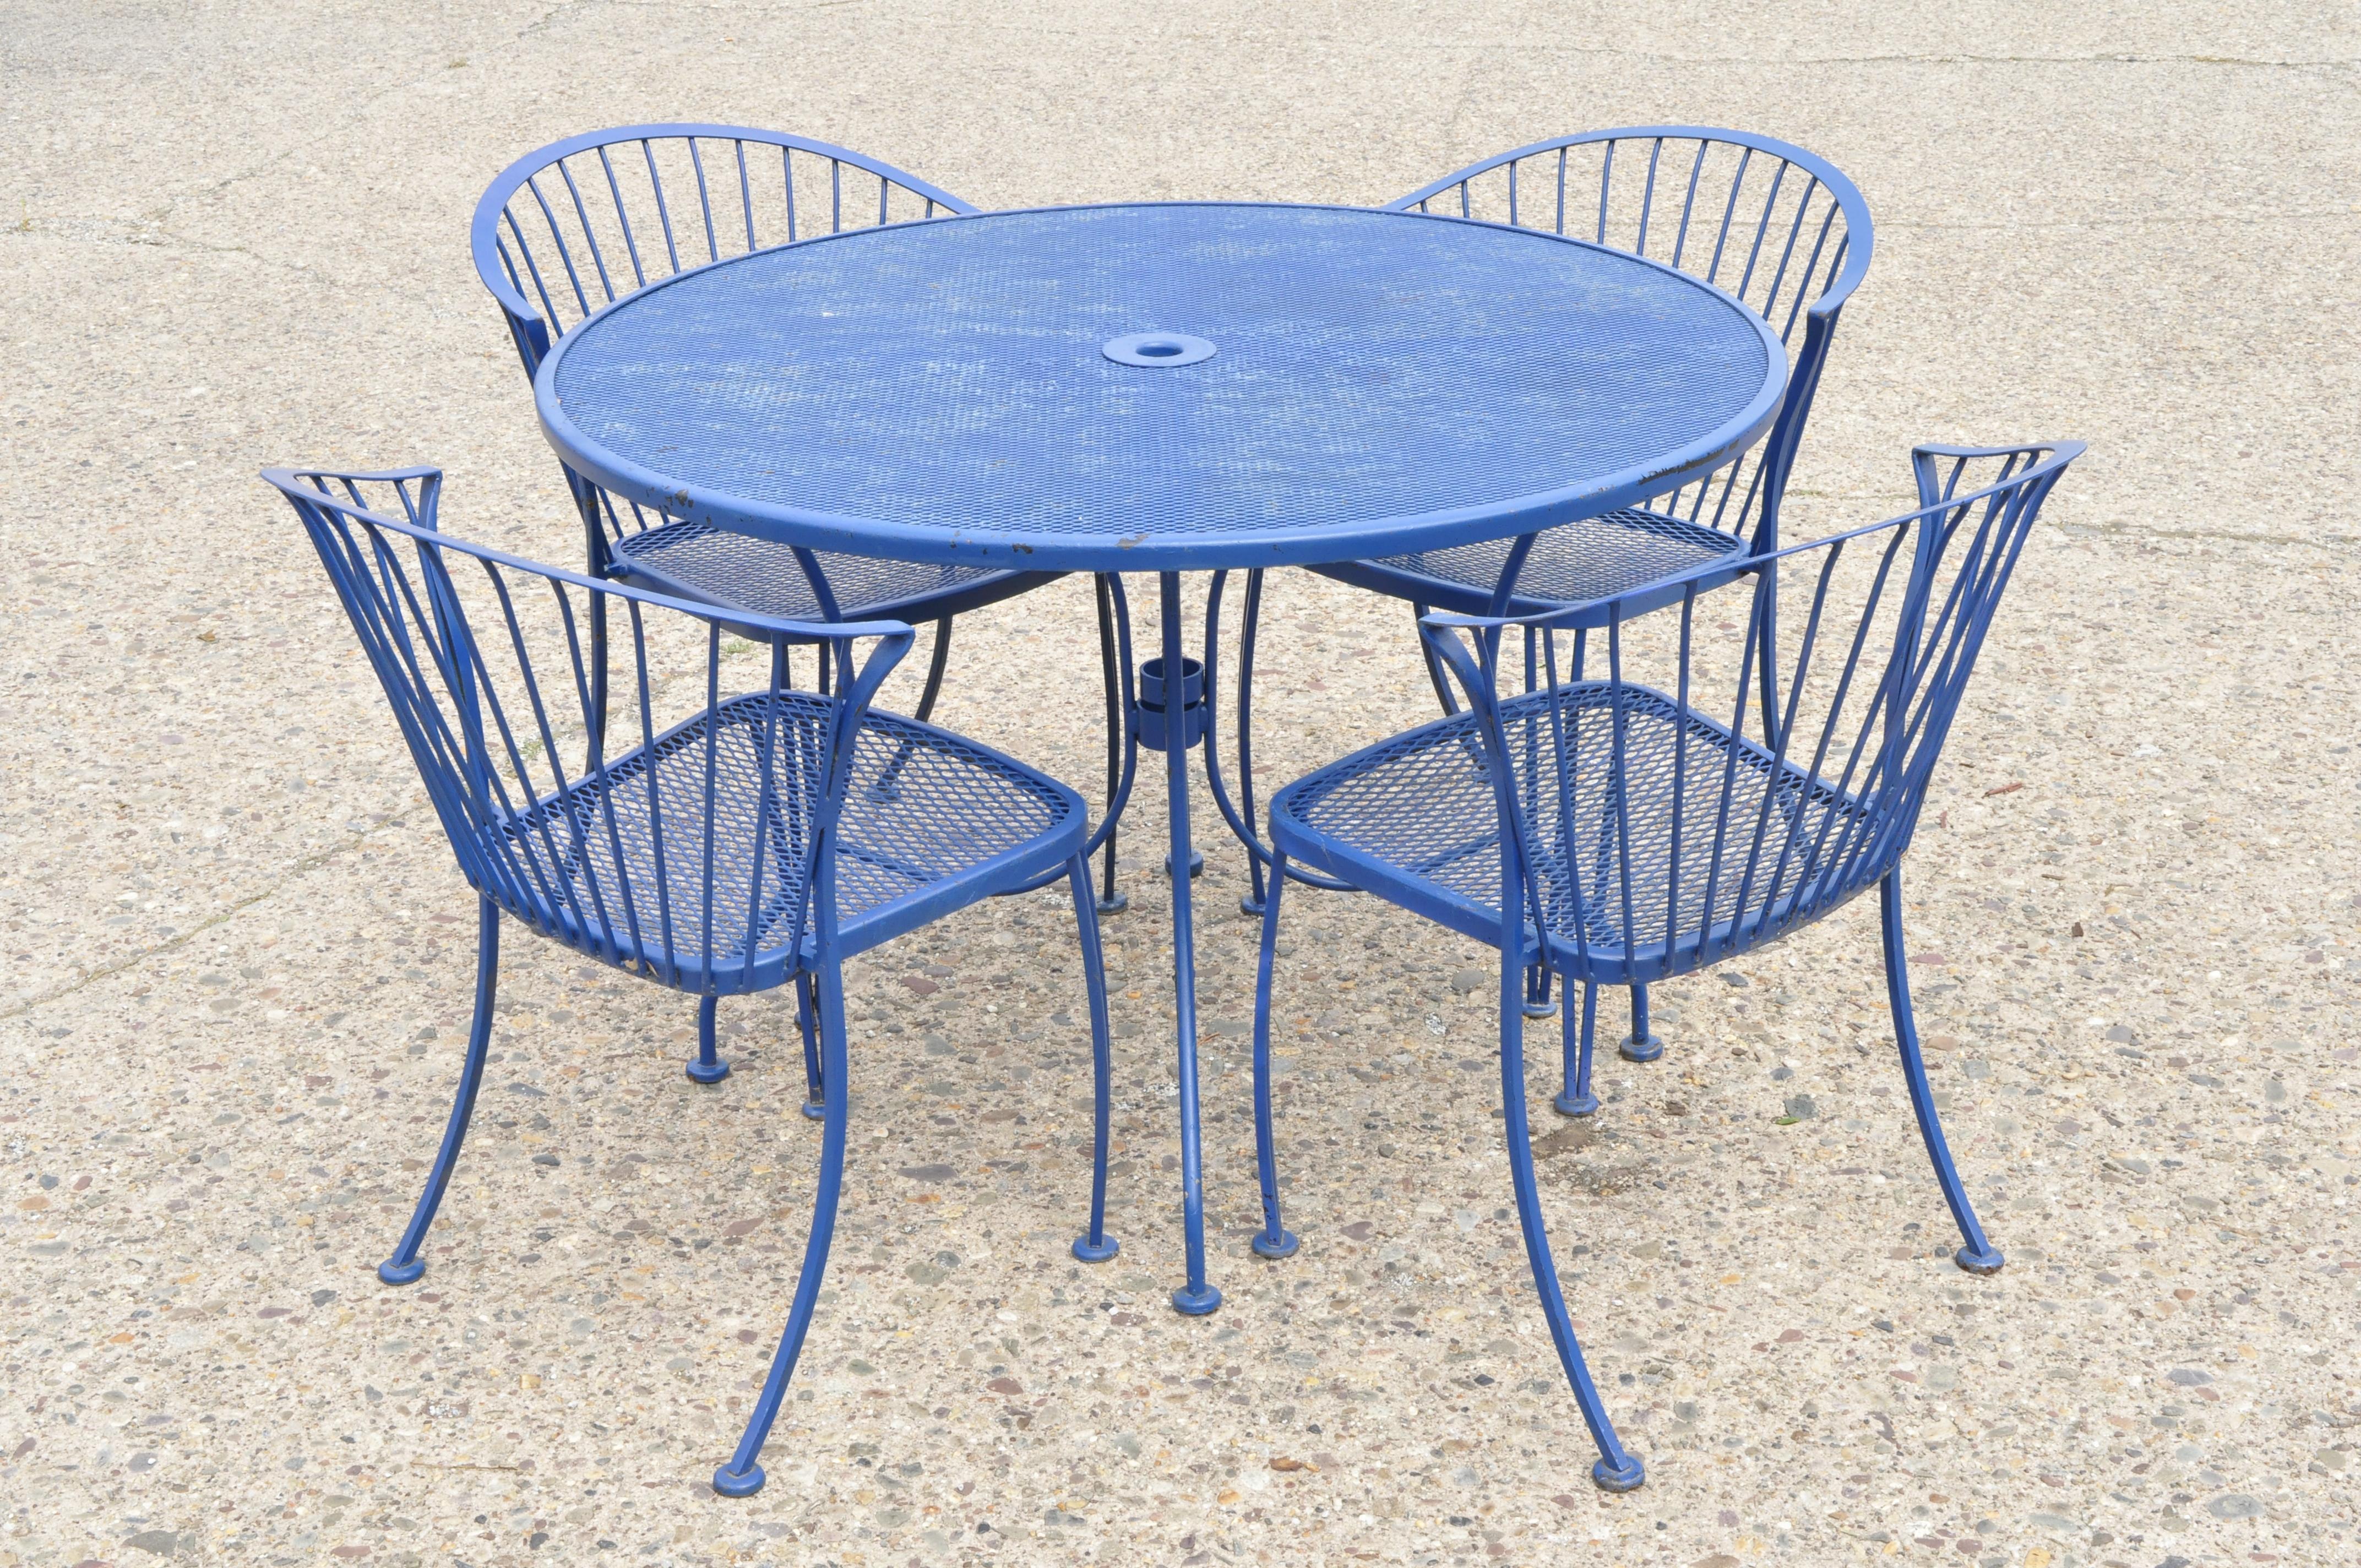 Woodard Pinecrest Blue Wrought Iron 5pc Patio Garden Dining 4 Chairs Round Table 6